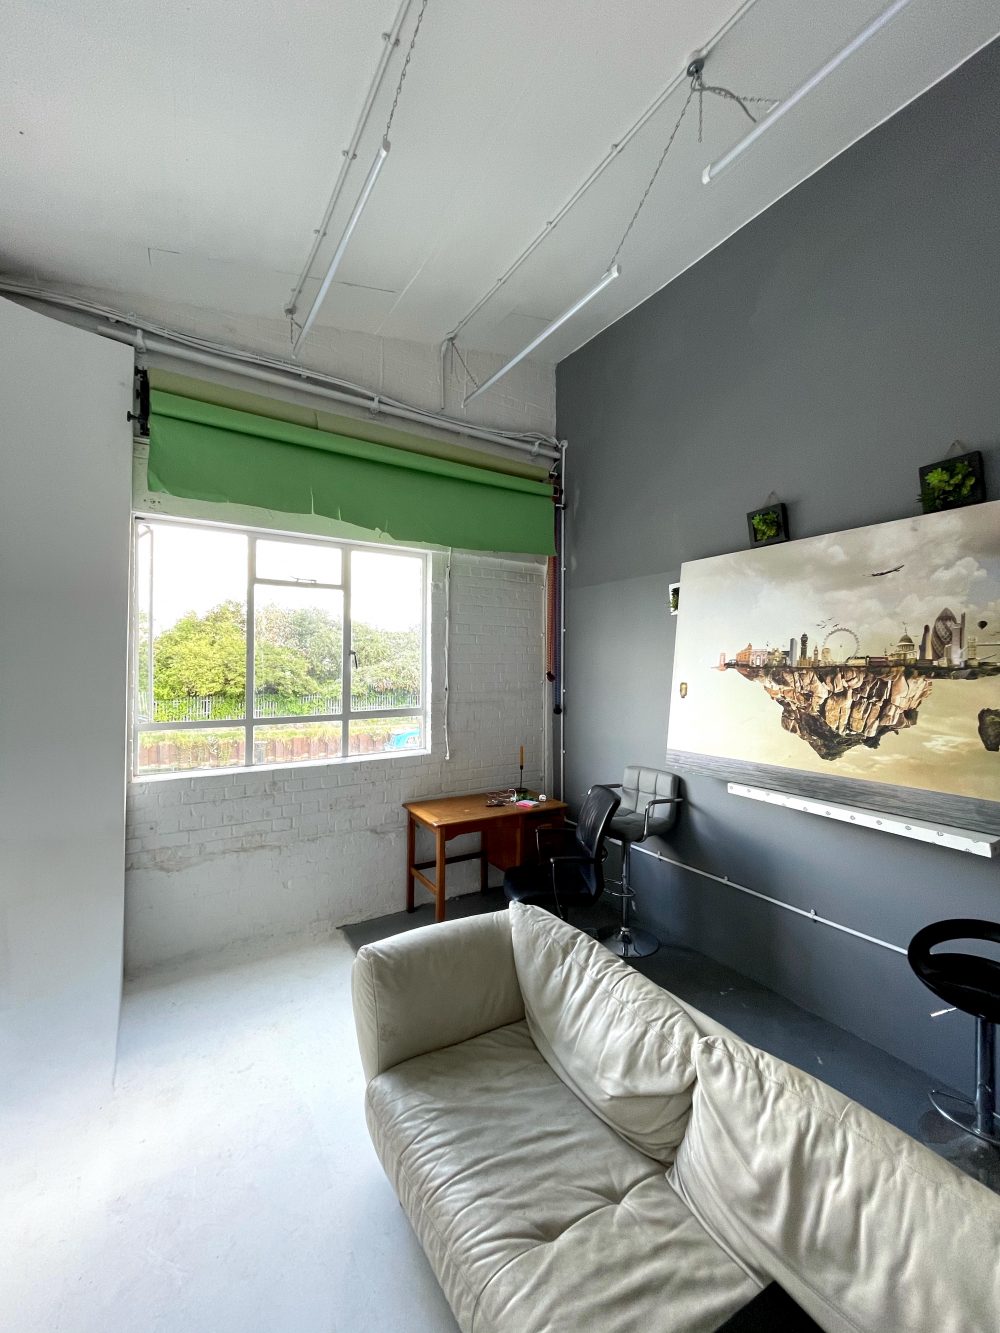 Studio Available to rent in E3 Hackney Wick Pic2